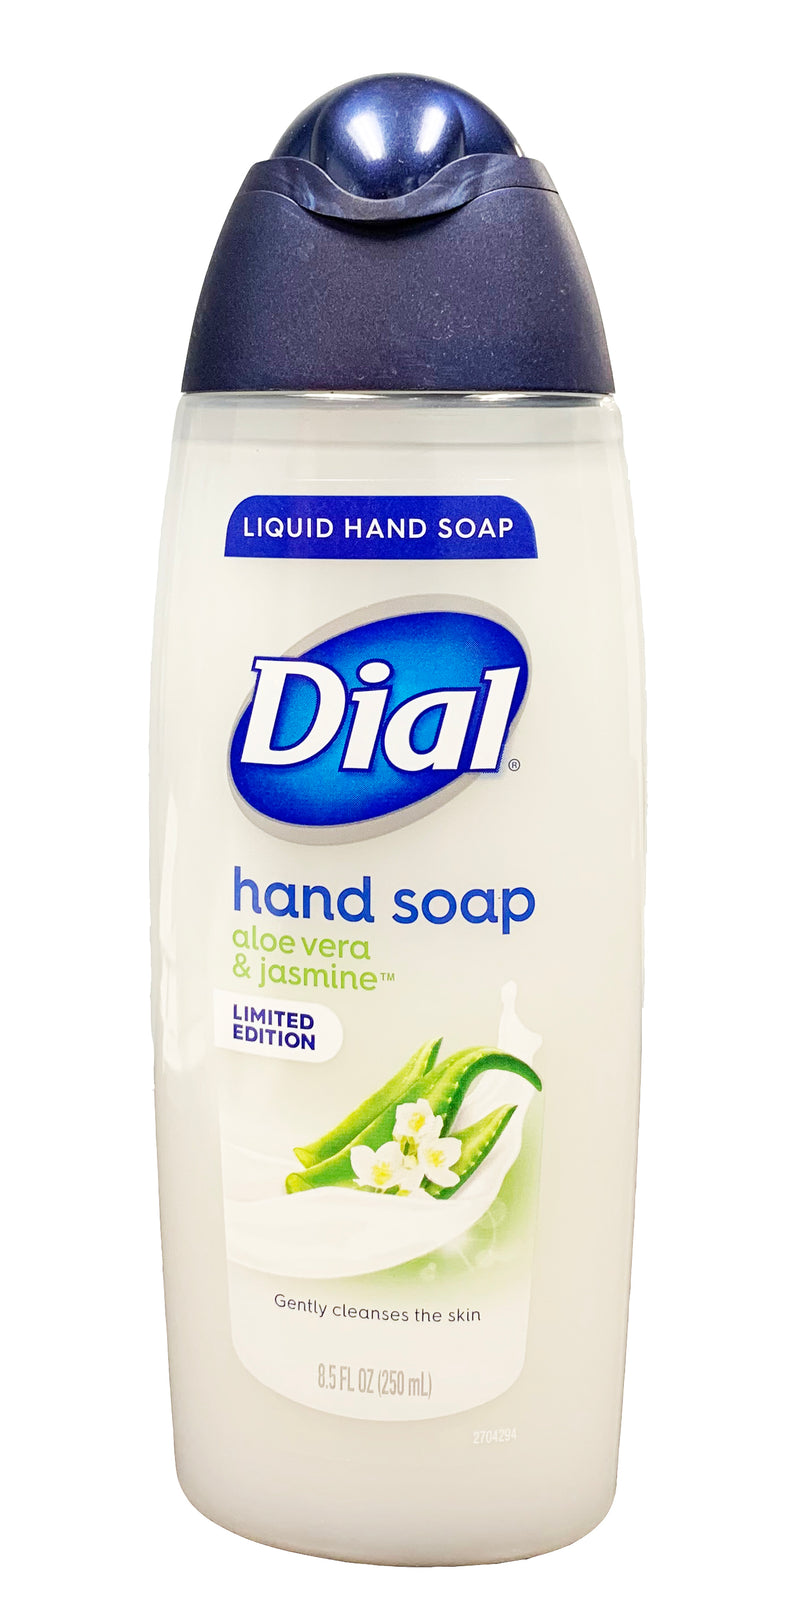 12 Pack Dial Liquid Hand Soap in Aloe Vera and Jasmine 8.5 Fl Oz [Limited Edition]